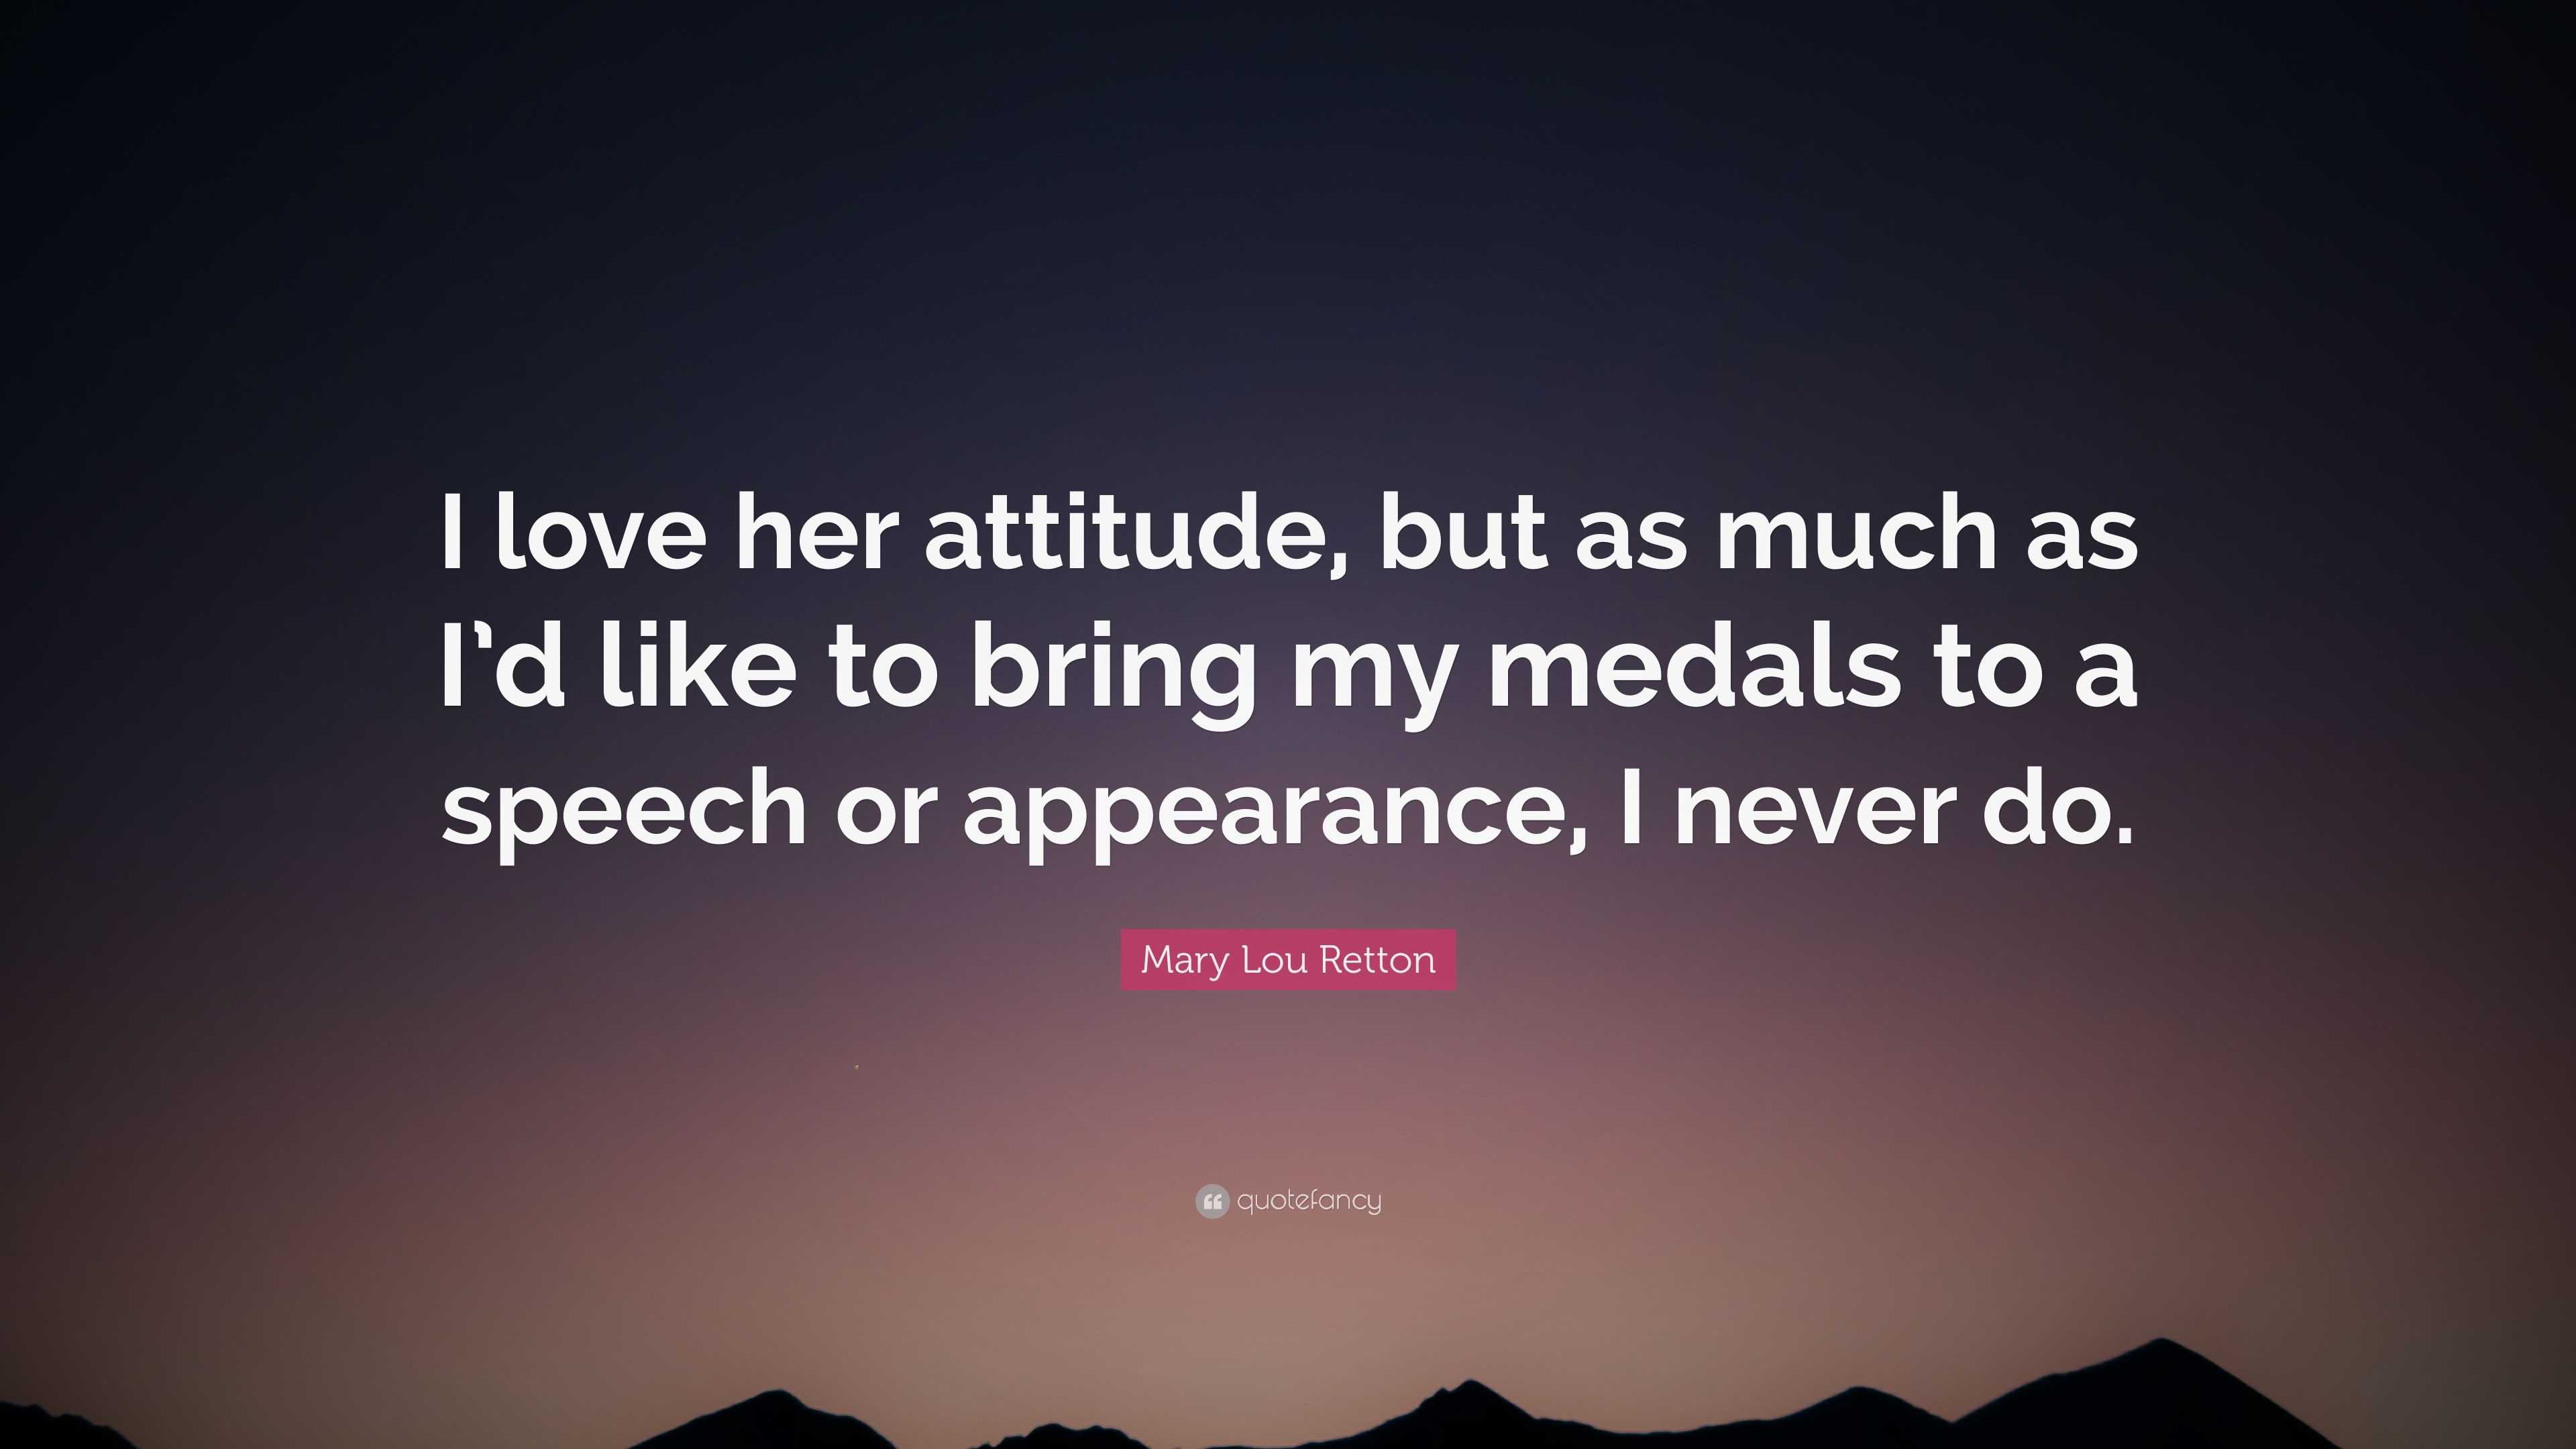 Mary Lou Retton Quote I Love Her Attitude But As Much As I D Like To Bring My Medals To A Speech Or Appearance I Never Do 7 Wallpapers Quotefancy